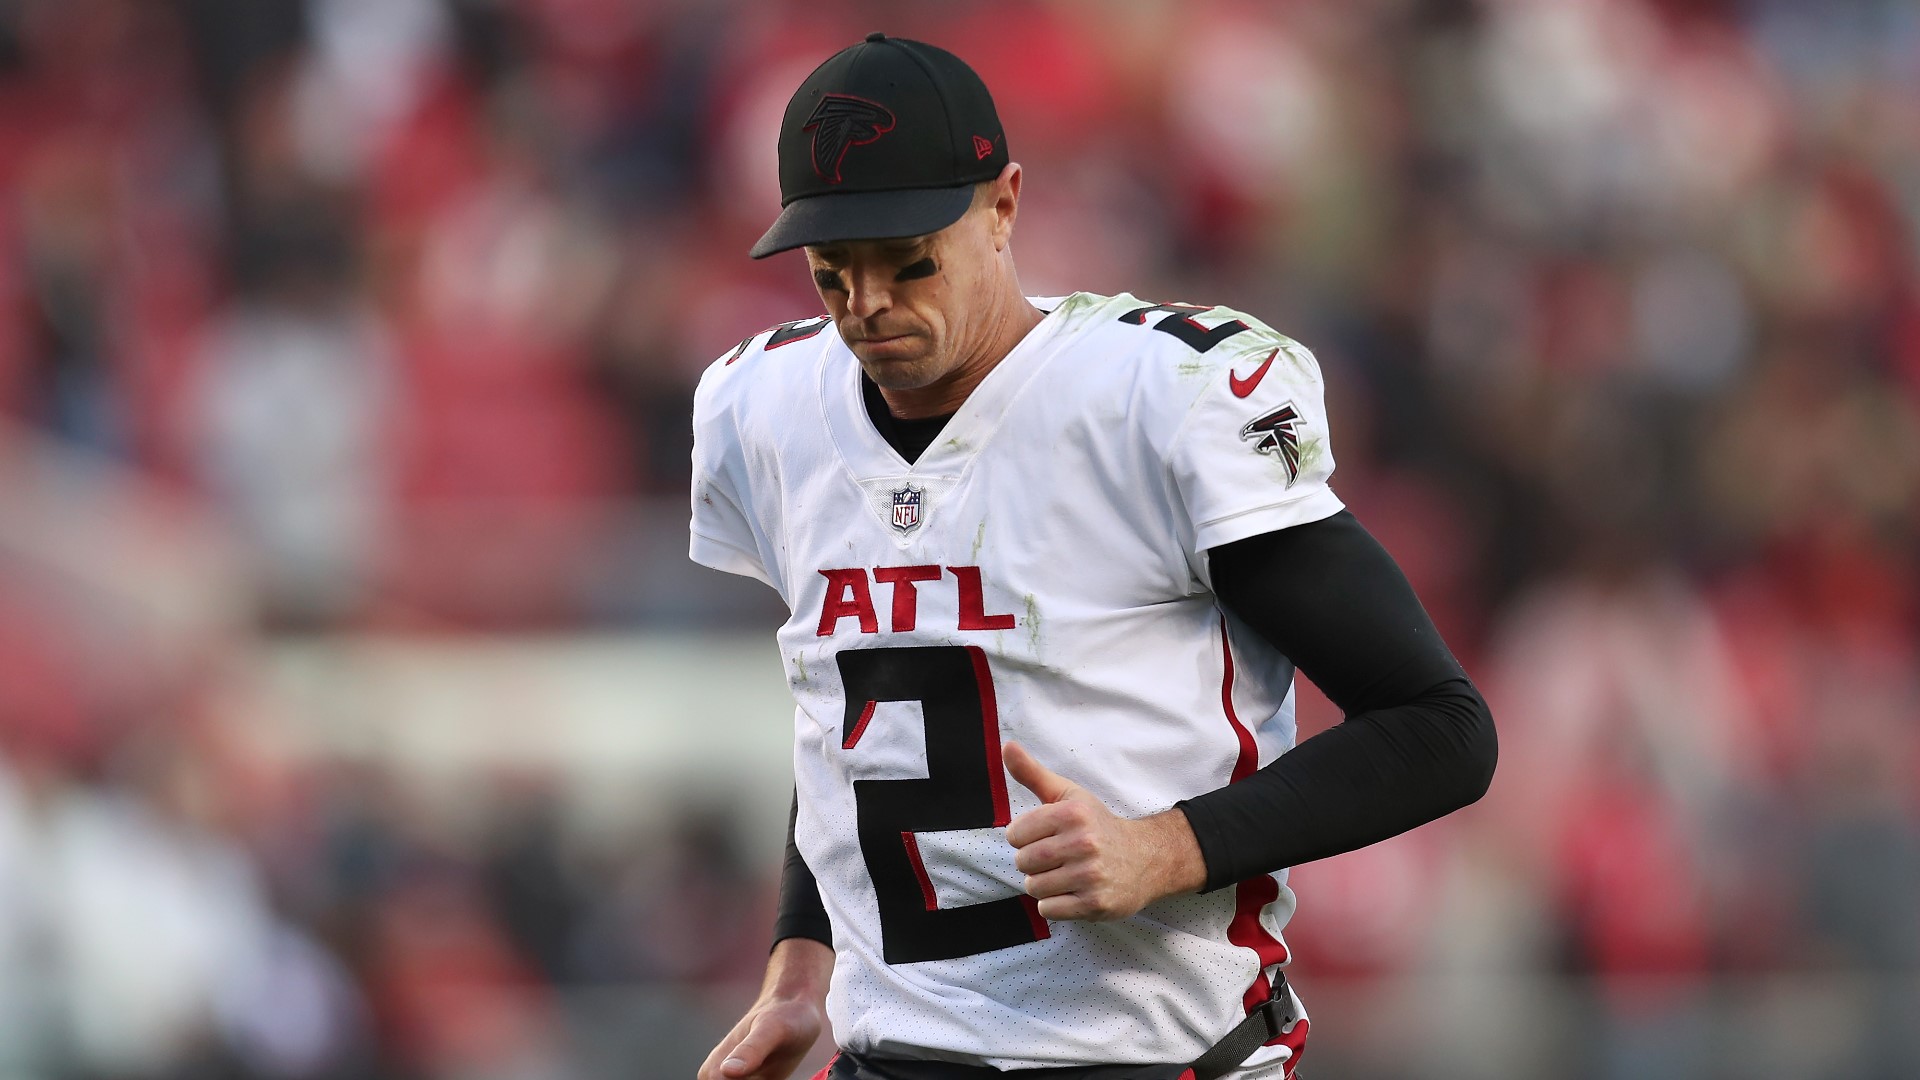 The Falcons have officially transitioned away from the longtime era defined by Matt Ryan at quarterback.